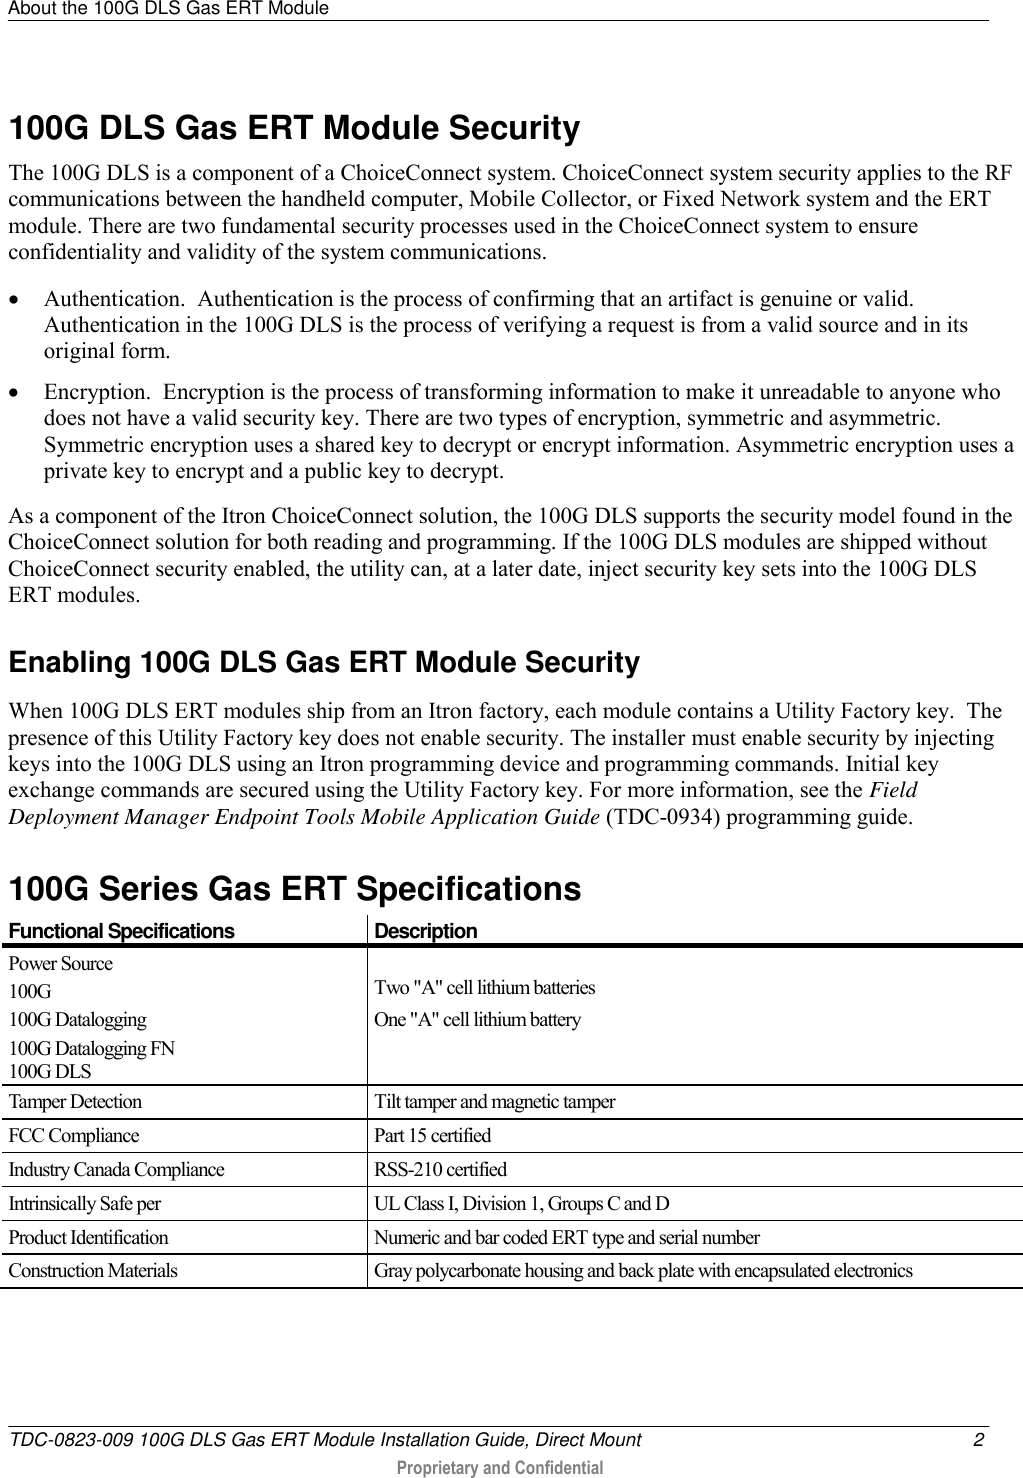 About the 100G DLS Gas ERT Module   TDC-0823-009 100G DLS Gas ERT Module Installation Guide, Direct Mount  2  Proprietary and Confidential    100G DLS Gas ERT Module Security The 100G DLS is a component of a ChoiceConnect system. ChoiceConnect system security applies to the RF communications between the handheld computer, Mobile Collector, or Fixed Network system and the ERT module. There are two fundamental security processes used in the ChoiceConnect system to ensure confidentiality and validity of the system communications.  Authentication.  Authentication is the process of confirming that an artifact is genuine or valid. Authentication in the 100G DLS is the process of verifying a request is from a valid source and in its original form.  Encryption.  Encryption is the process of transforming information to make it unreadable to anyone who does not have a valid security key. There are two types of encryption, symmetric and asymmetric.  Symmetric encryption uses a shared key to decrypt or encrypt information. Asymmetric encryption uses a private key to encrypt and a public key to decrypt. As a component of the Itron ChoiceConnect solution, the 100G DLS supports the security model found in the  ChoiceConnect solution for both reading and programming. If the 100G DLS modules are shipped without ChoiceConnect security enabled, the utility can, at a later date, inject security key sets into the 100G DLS ERT modules.    Enabling 100G DLS Gas ERT Module Security When 100G DLS ERT modules ship from an Itron factory, each module contains a Utility Factory key.  The presence of this Utility Factory key does not enable security. The installer must enable security by injecting keys into the 100G DLS using an Itron programming device and programming commands. Initial key exchange commands are secured using the Utility Factory key. For more information, see the Field Deployment Manager Endpoint Tools Mobile Application Guide (TDC-0934) programming guide.  100G Series Gas ERT Specifications  Functional Specifications Description Power Source 100G 100G Datalogging 100G Datalogging FN 100G DLS  Two &quot;A&quot; cell lithium batteries One &quot;A&quot; cell lithium battery Tamper Detection Tilt tamper and magnetic tamper FCC Compliance Part 15 certified Industry Canada Compliance RSS-210 certified Intrinsically Safe per UL Class I, Division 1, Groups C and D Product Identification Numeric and bar coded ERT type and serial number Construction Materials Gray polycarbonate housing and back plate with encapsulated electronics  